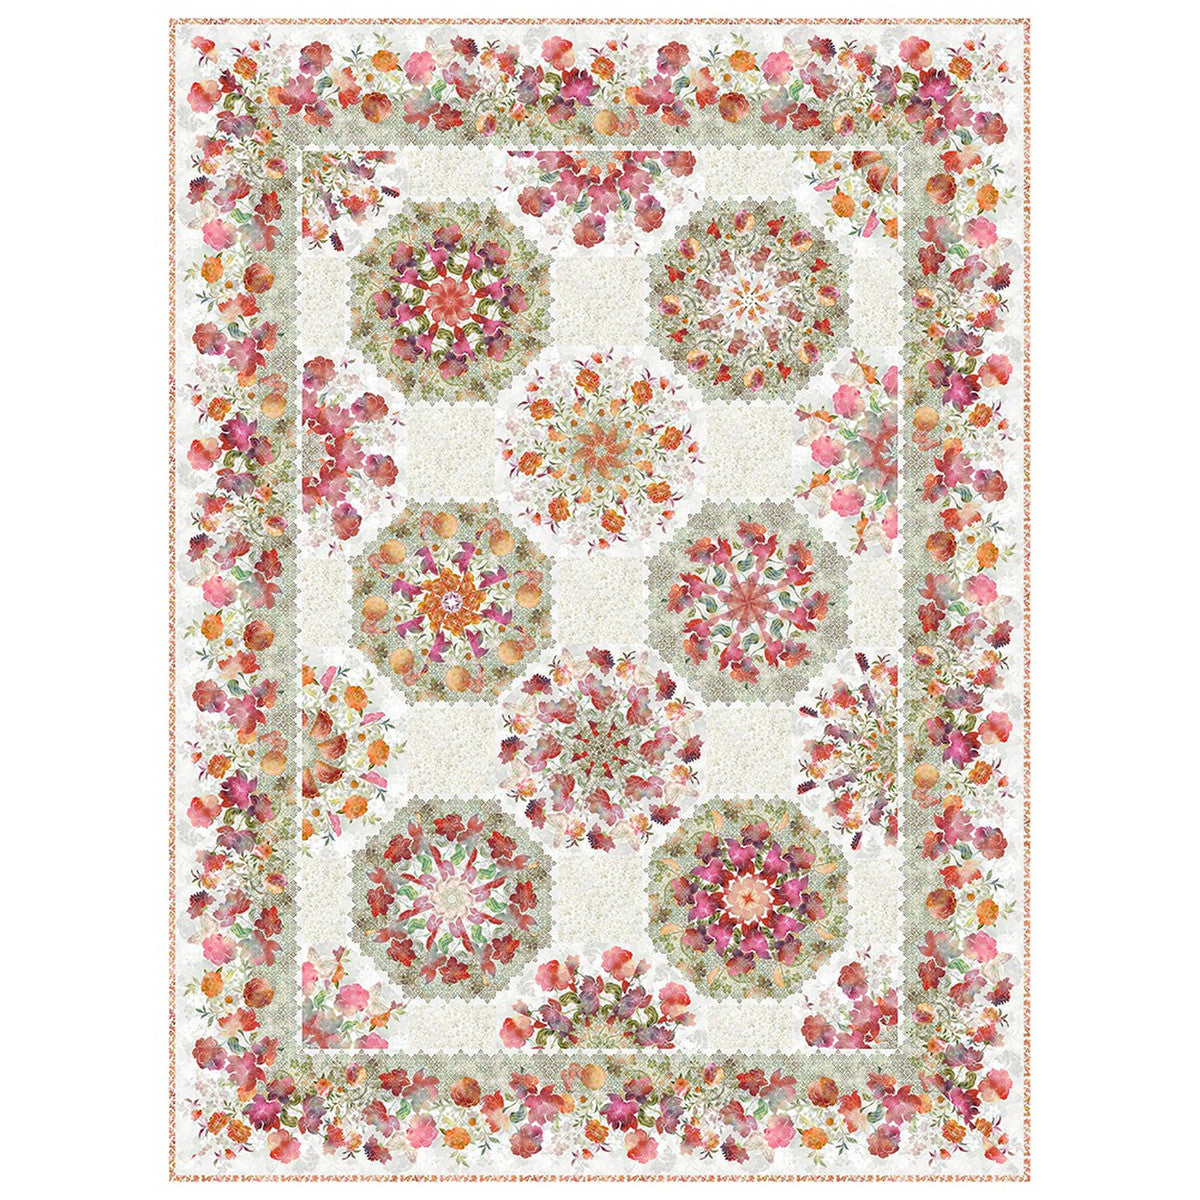 Ethereal Kaleidoscope Quilt Kit - Red/Rust by Jason Yenter